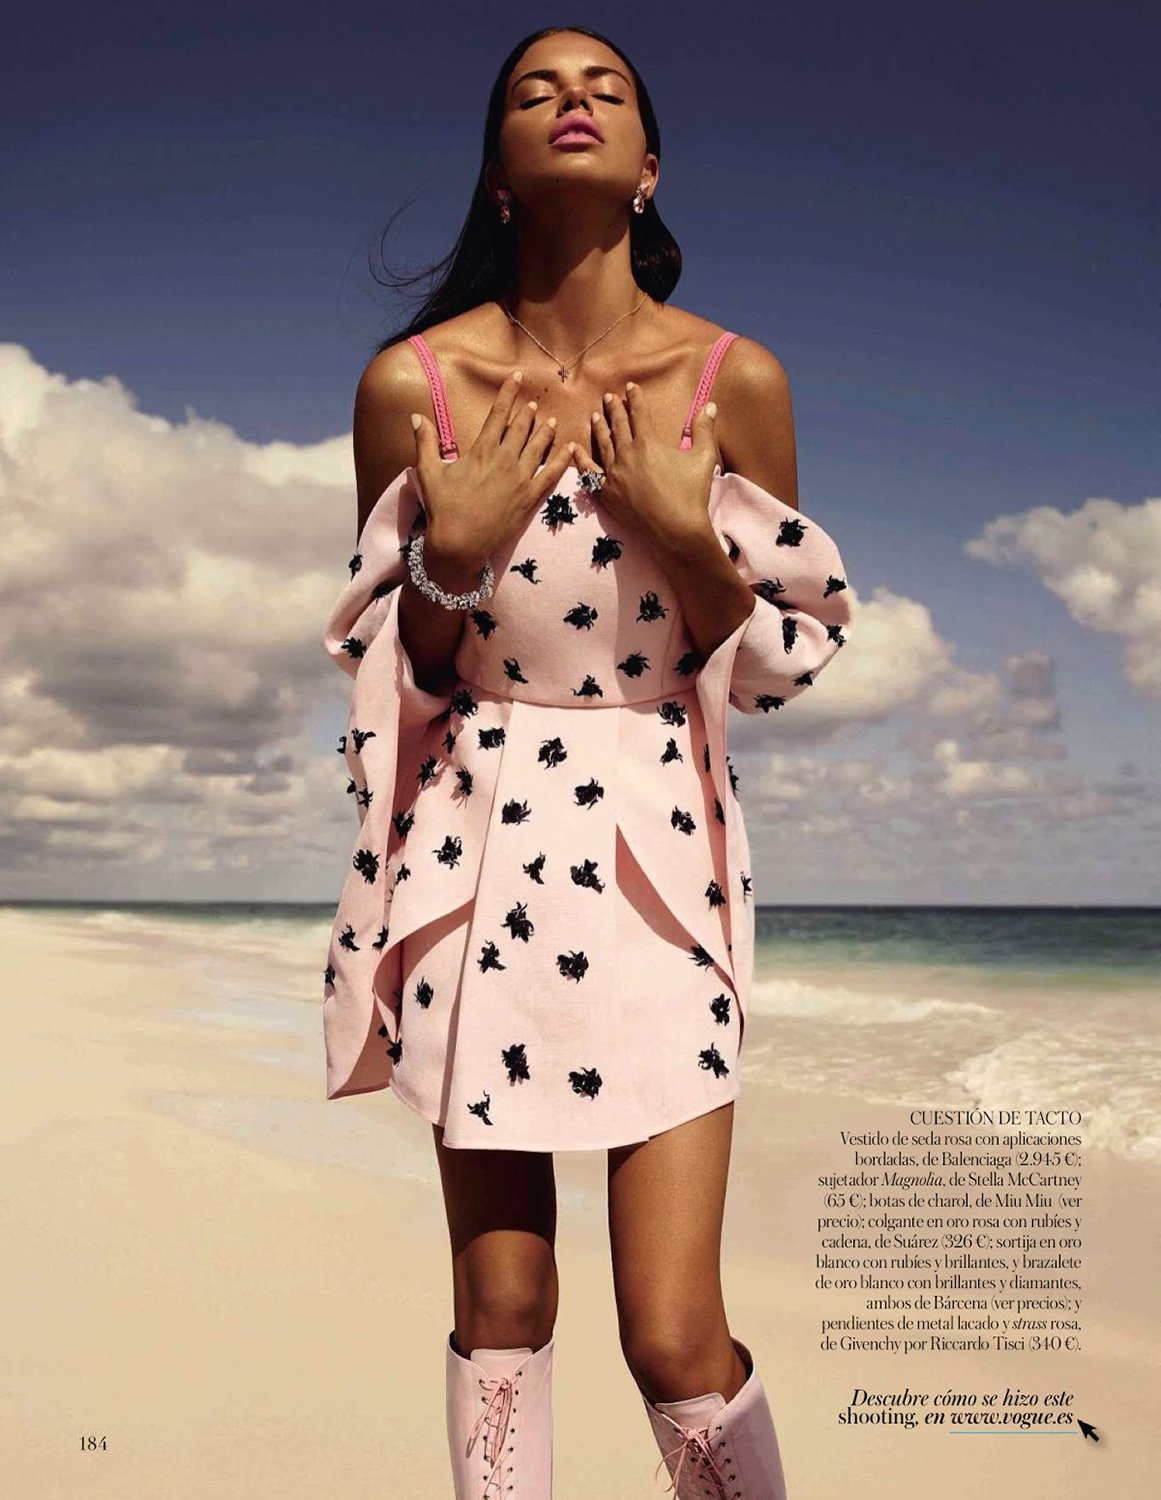 Adriana-Lima-by-Miguel-Reveriego-Vogue-Spain-May-2014 (11).jpg